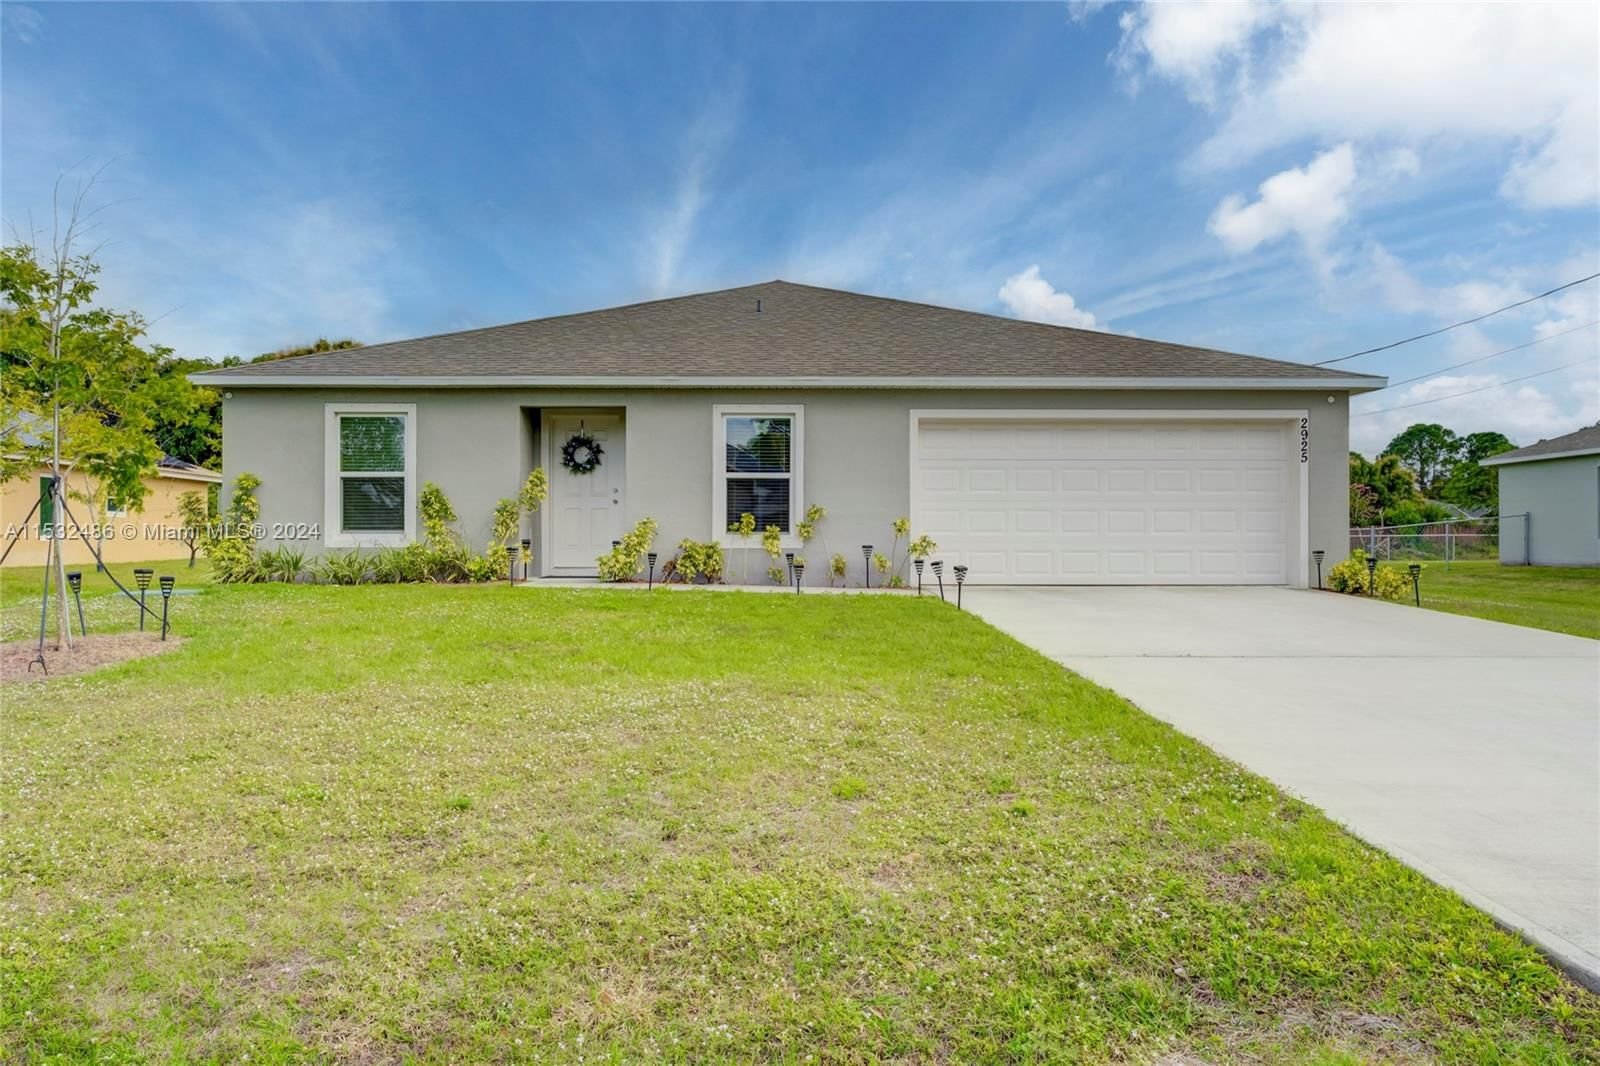 Real estate property located at 2925 Skyline St, St Lucie County, PORT ST LUCIE SECTION 41, Port St. Lucie, FL